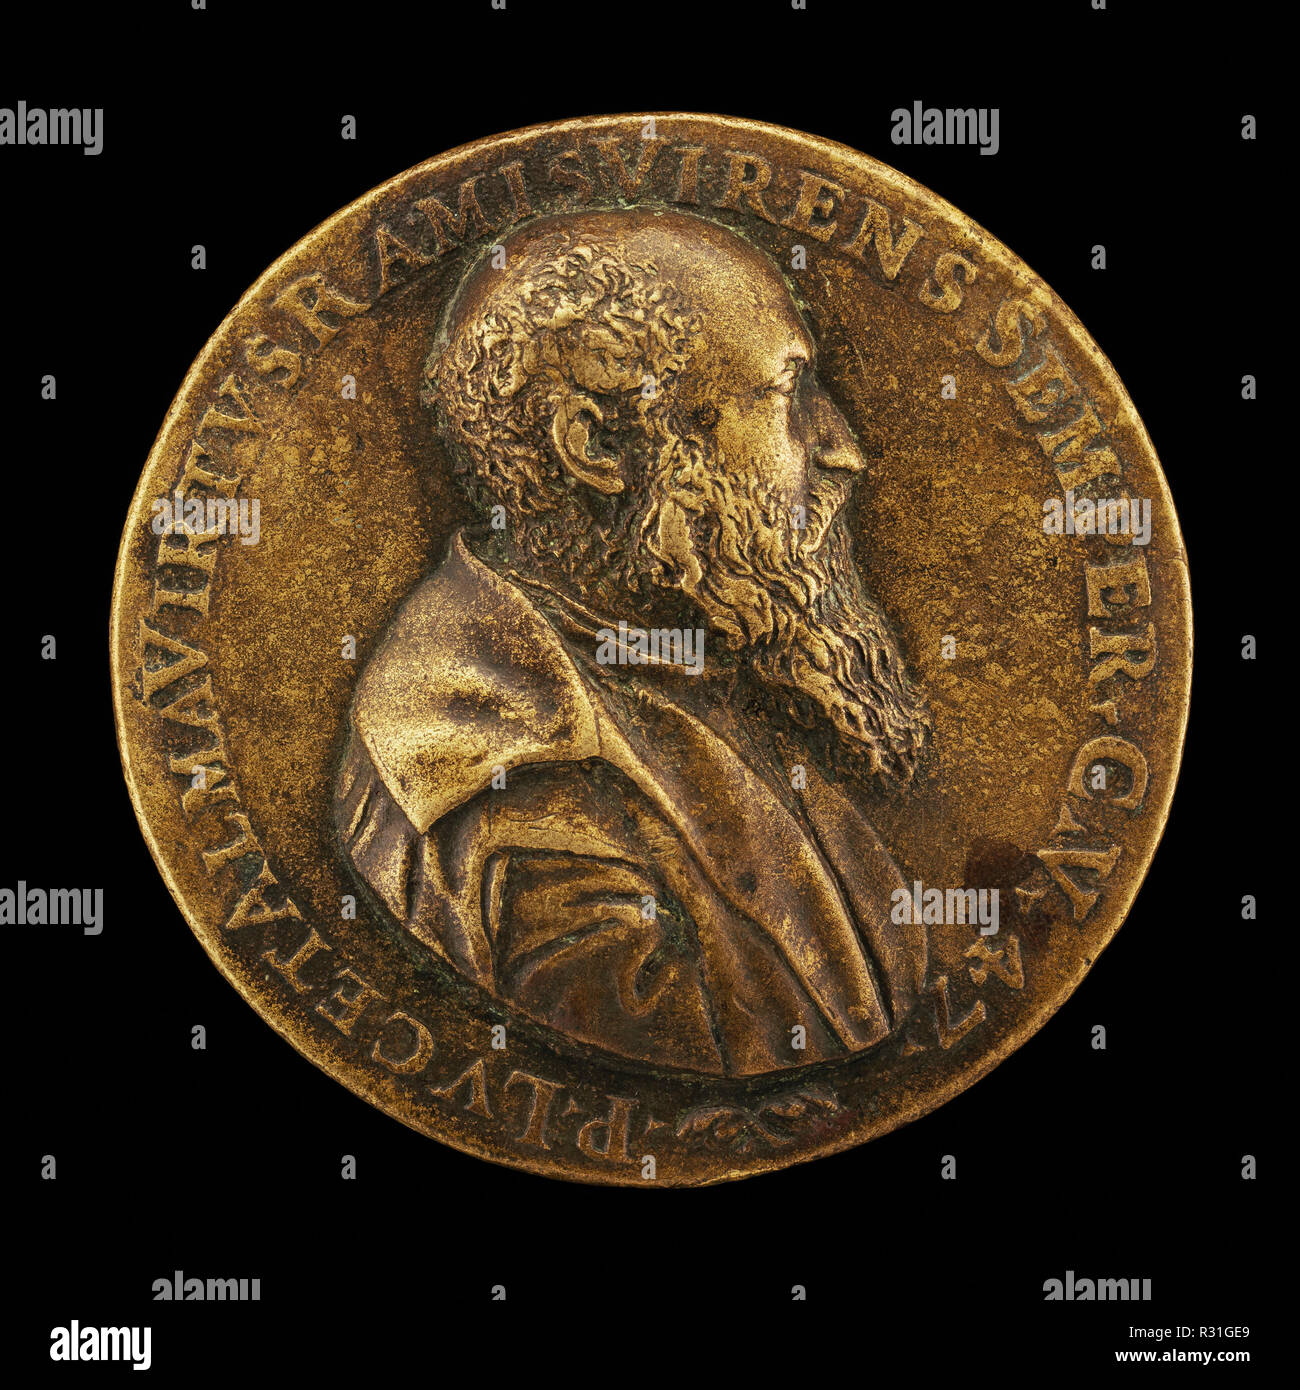 Pietro Lauro, born 1508, Modenese Poet and Scholar [obverse]. Dated: 1555. Dimensions: overall (diameter): 5.7 cm (2 1/4 in.)  gross weight: 83.76 gr (0.185 lb.)  axis: 12:00. Medium: bronze. Museum: National Gallery of Art, Washington DC. Author: Master I. A. V. F. Stock Photo